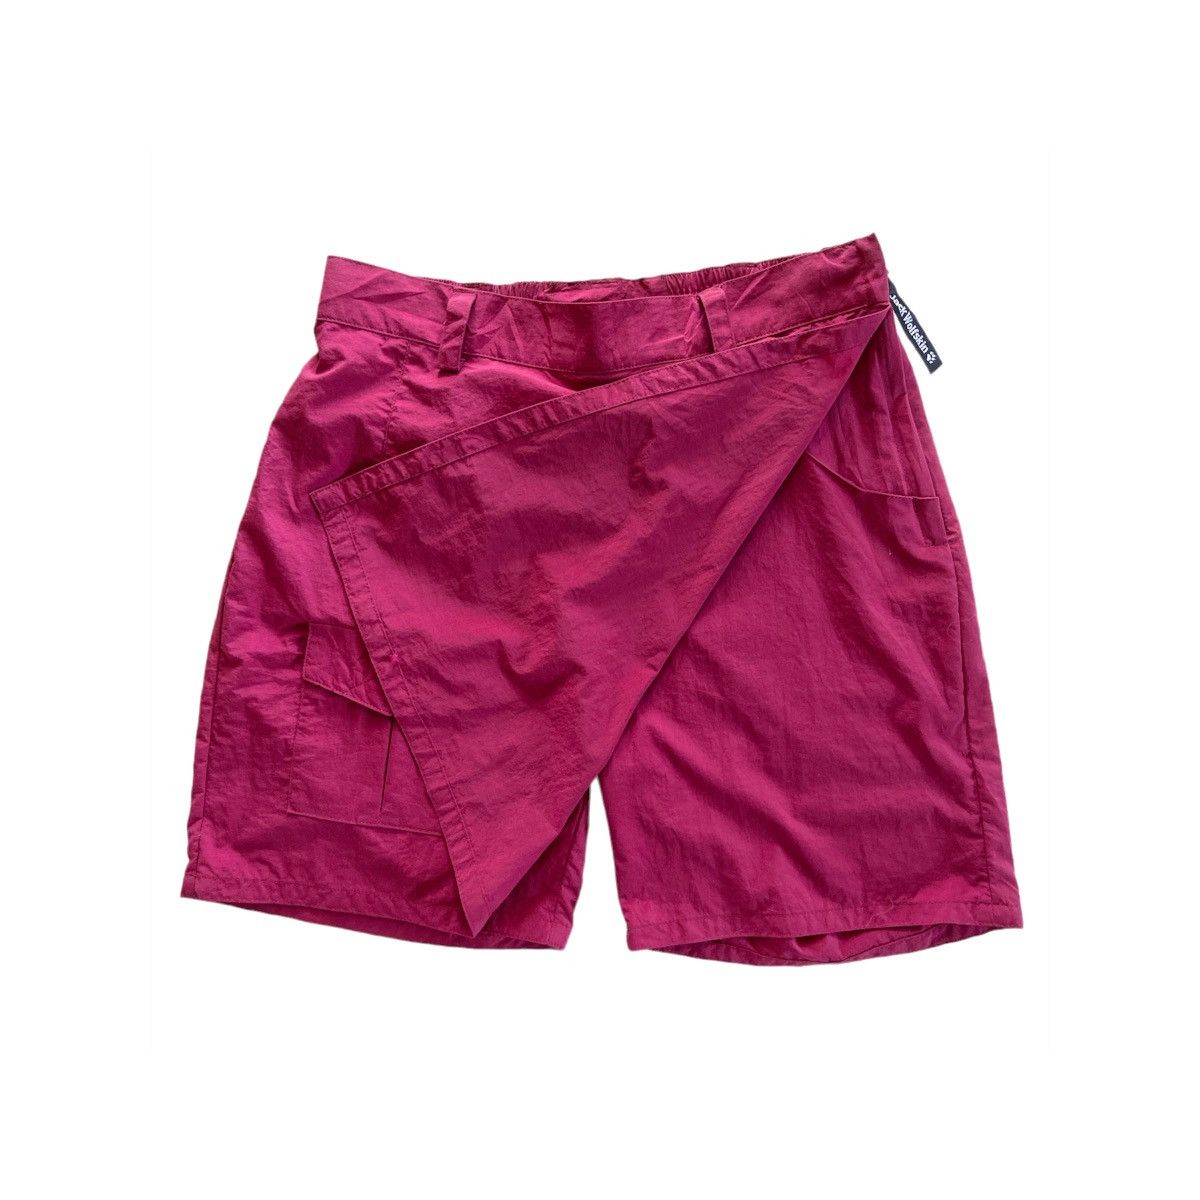 Outdoor Style Go Out! - Jack Wolfskin Utility Shorts - 2